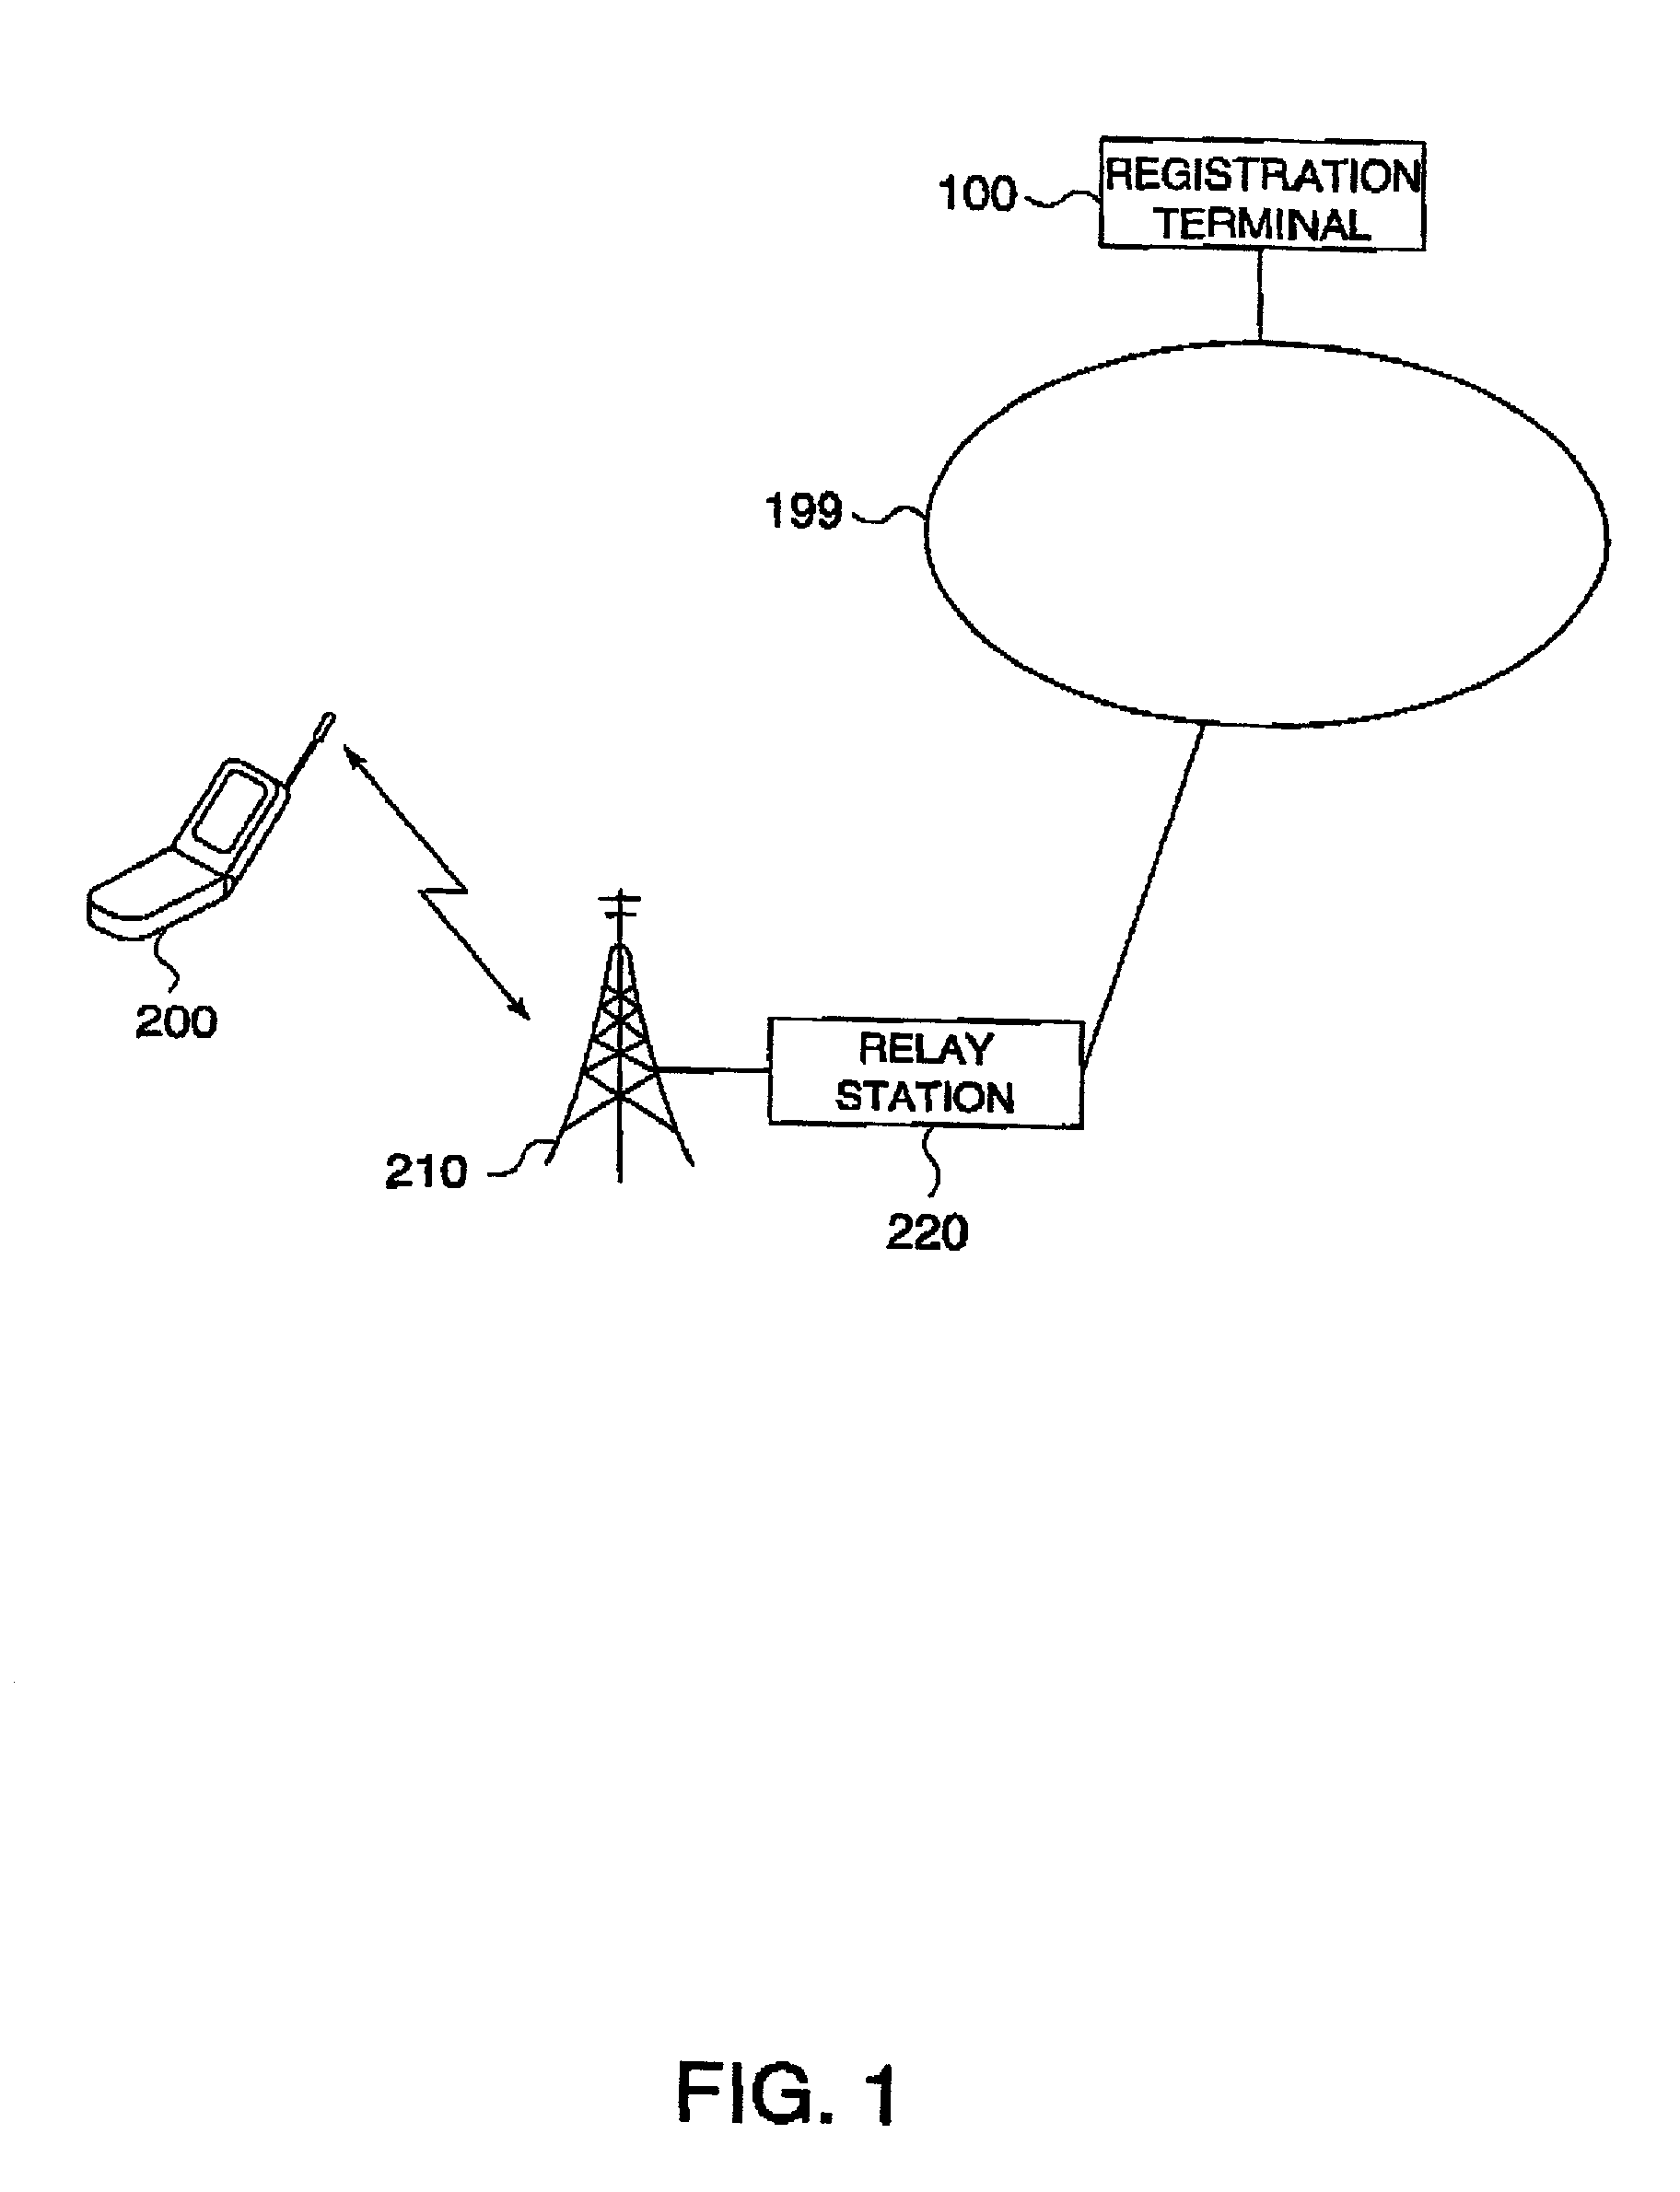 System and method for providing information to a portable terminal